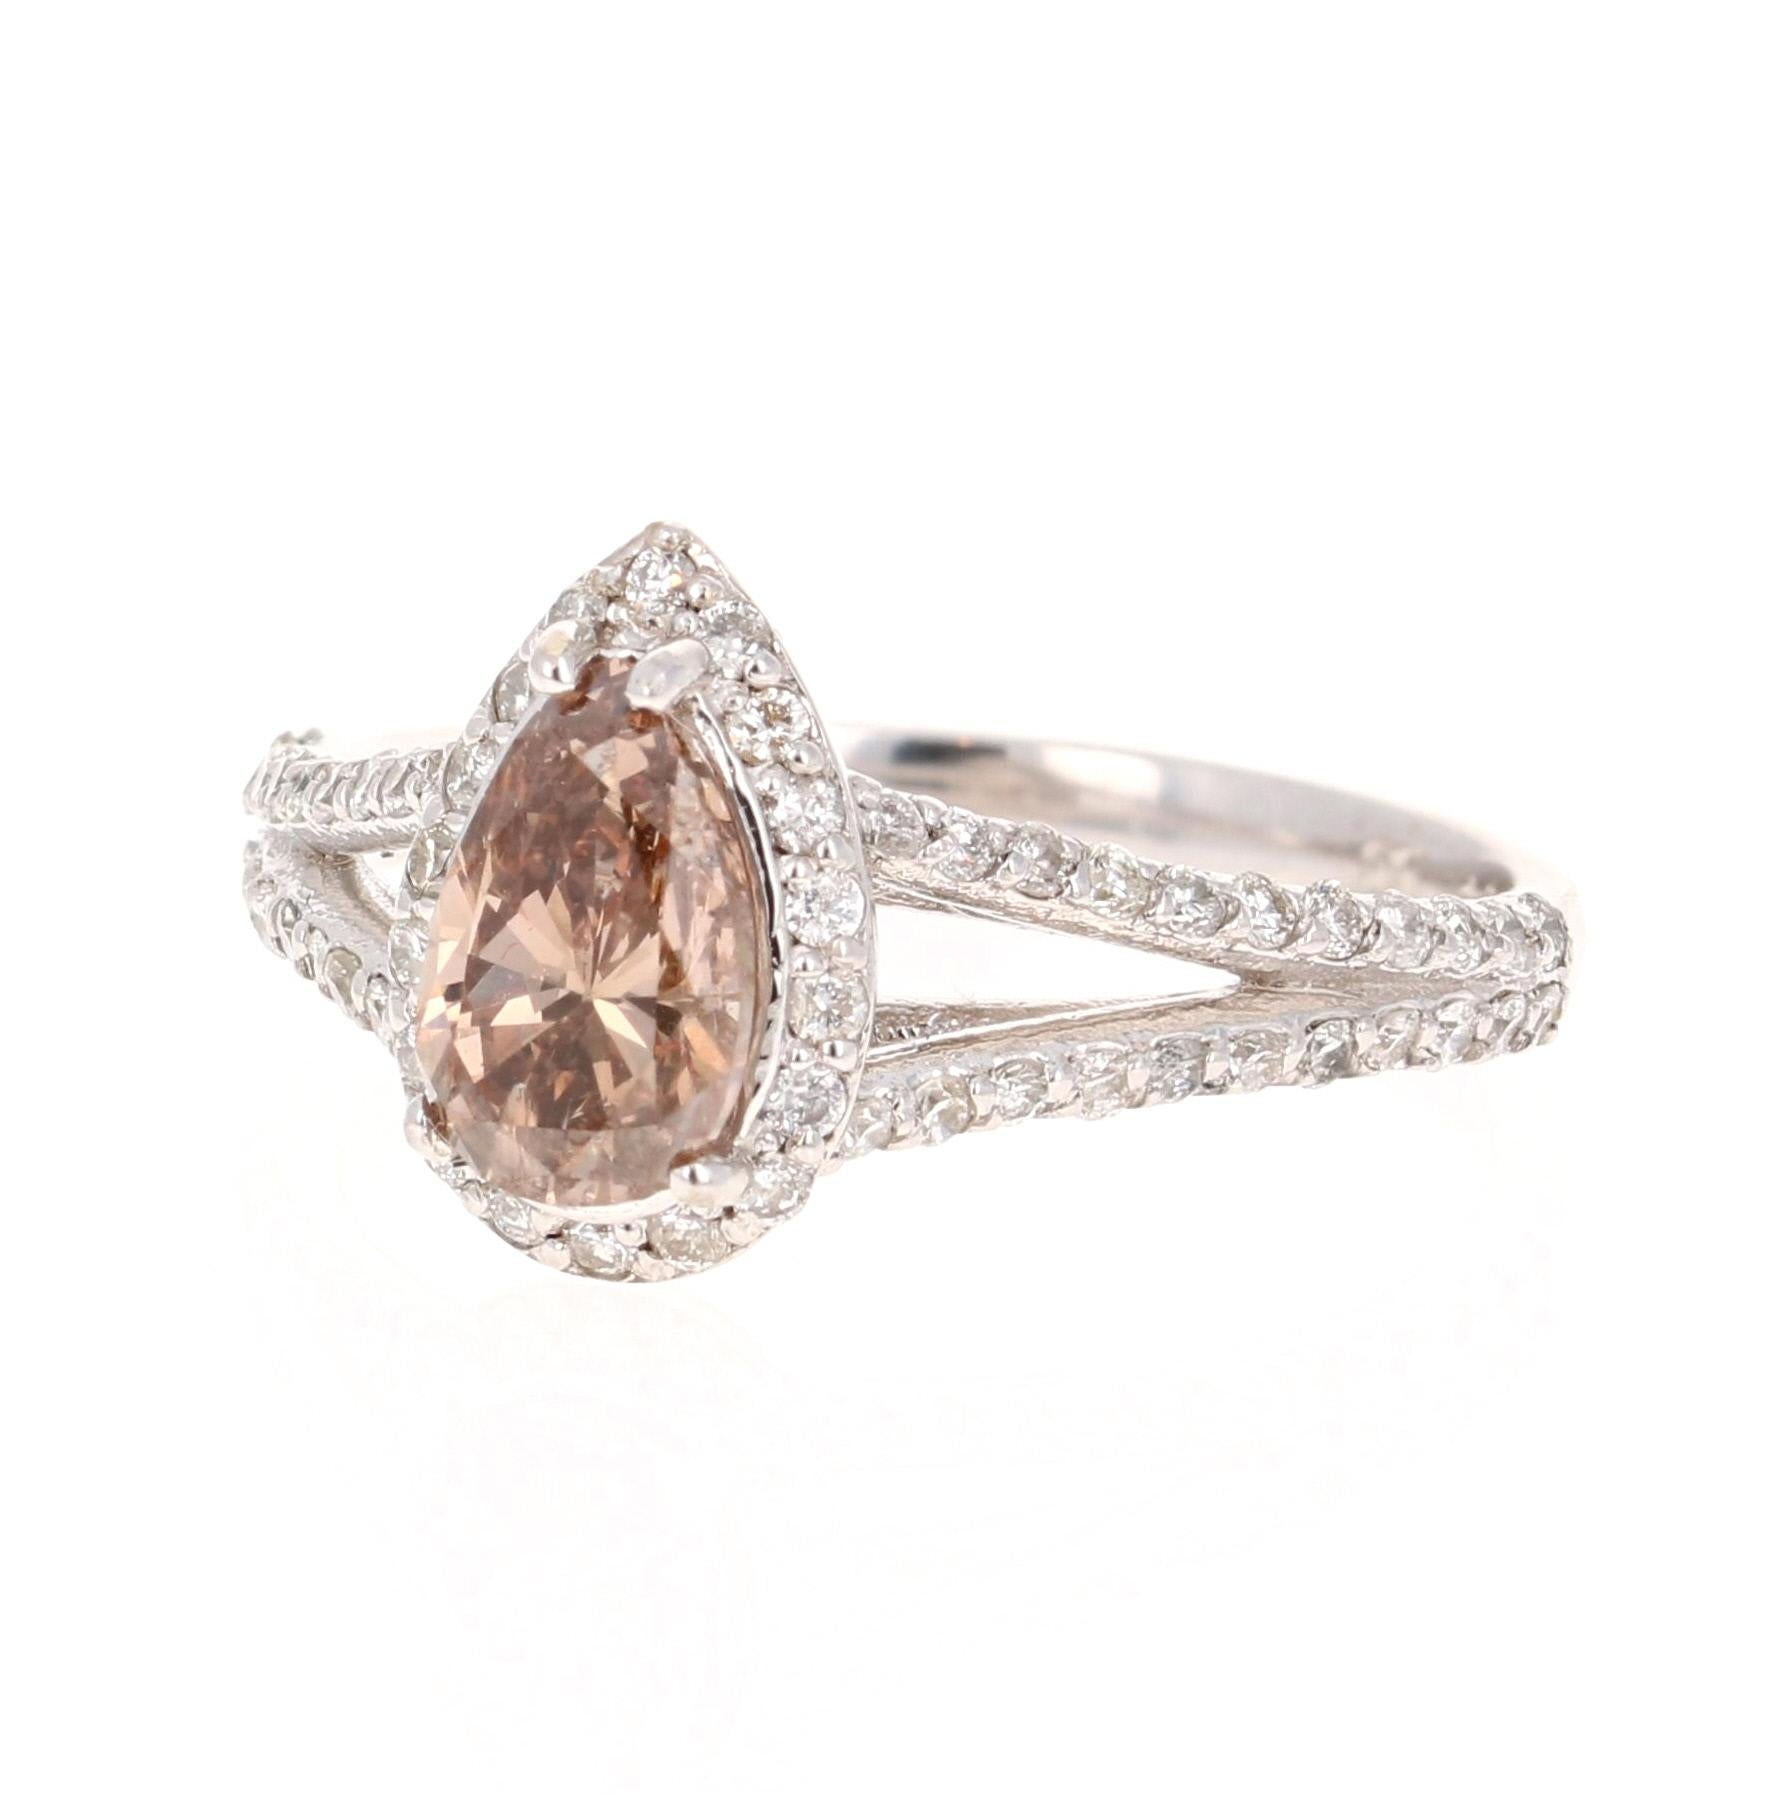 Contemporary 1.58 Carat Natural Fancy Brown Diamond Engagement 14 Karat White Gold Ring For Sale